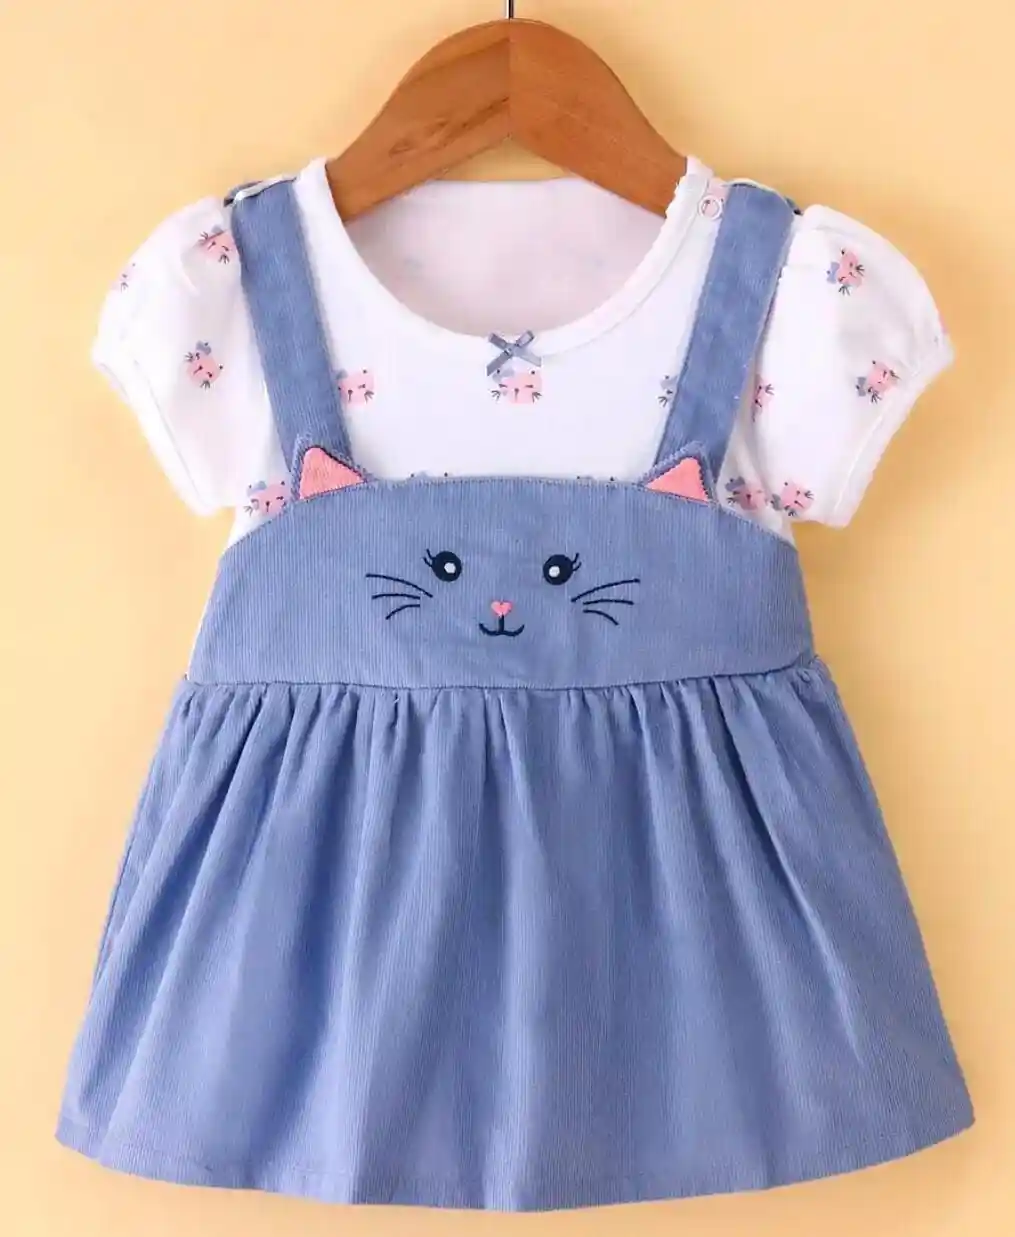 Cotton Knit Half Sleeves Frock with Kitty Print - Blue & White